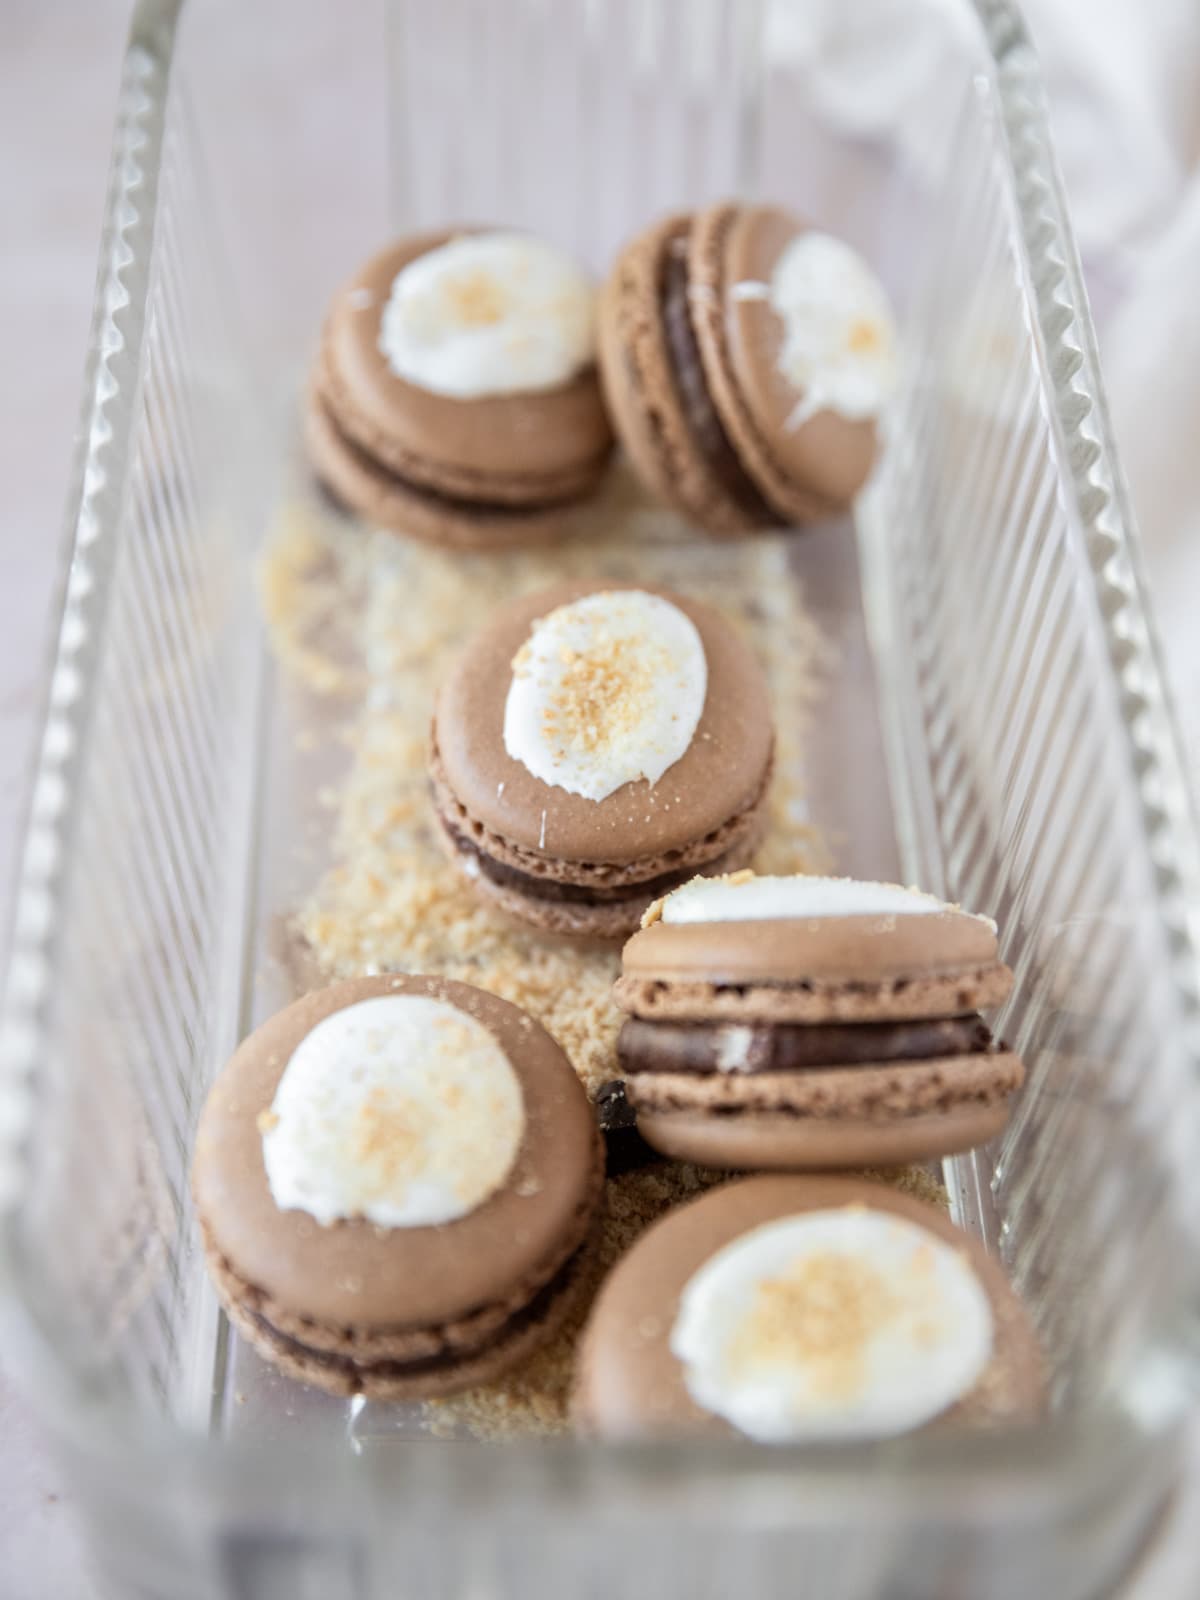 several smore macarons in a glass dish with graham cracker crumbs.